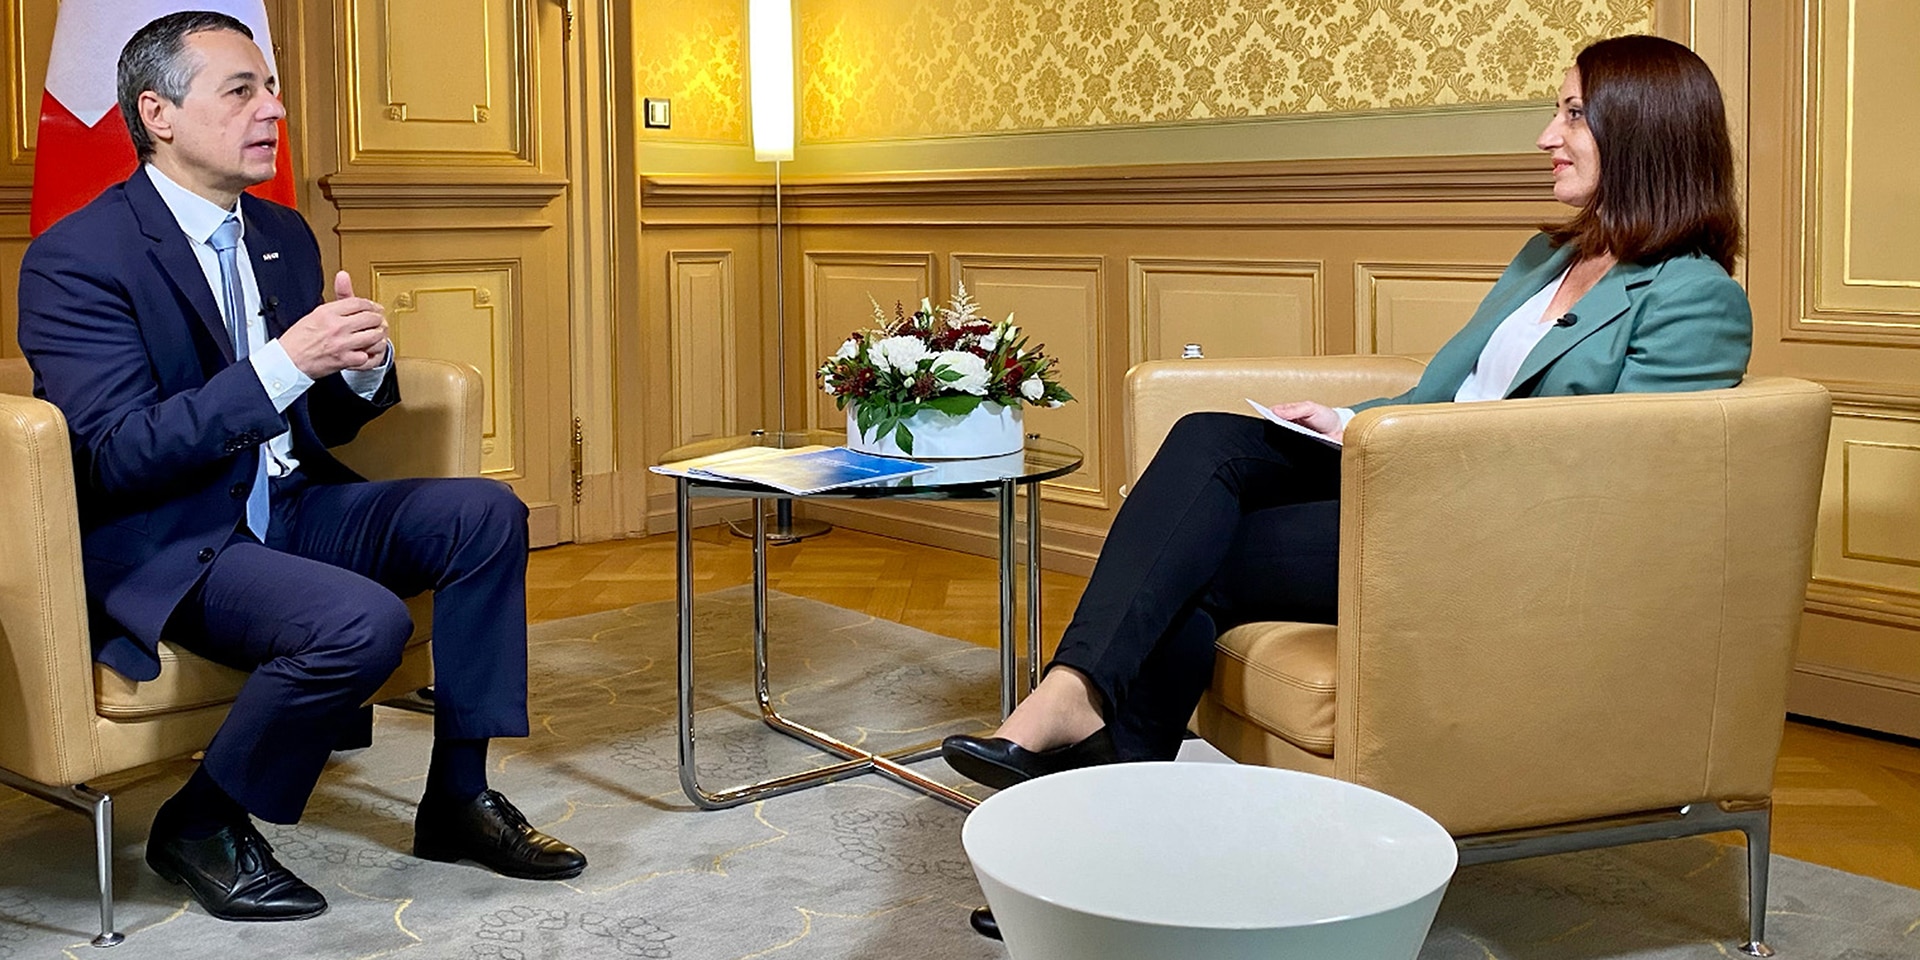  Federal Councillor Ignazio Cassis sits in a chair and talks to the presenter during an interview.